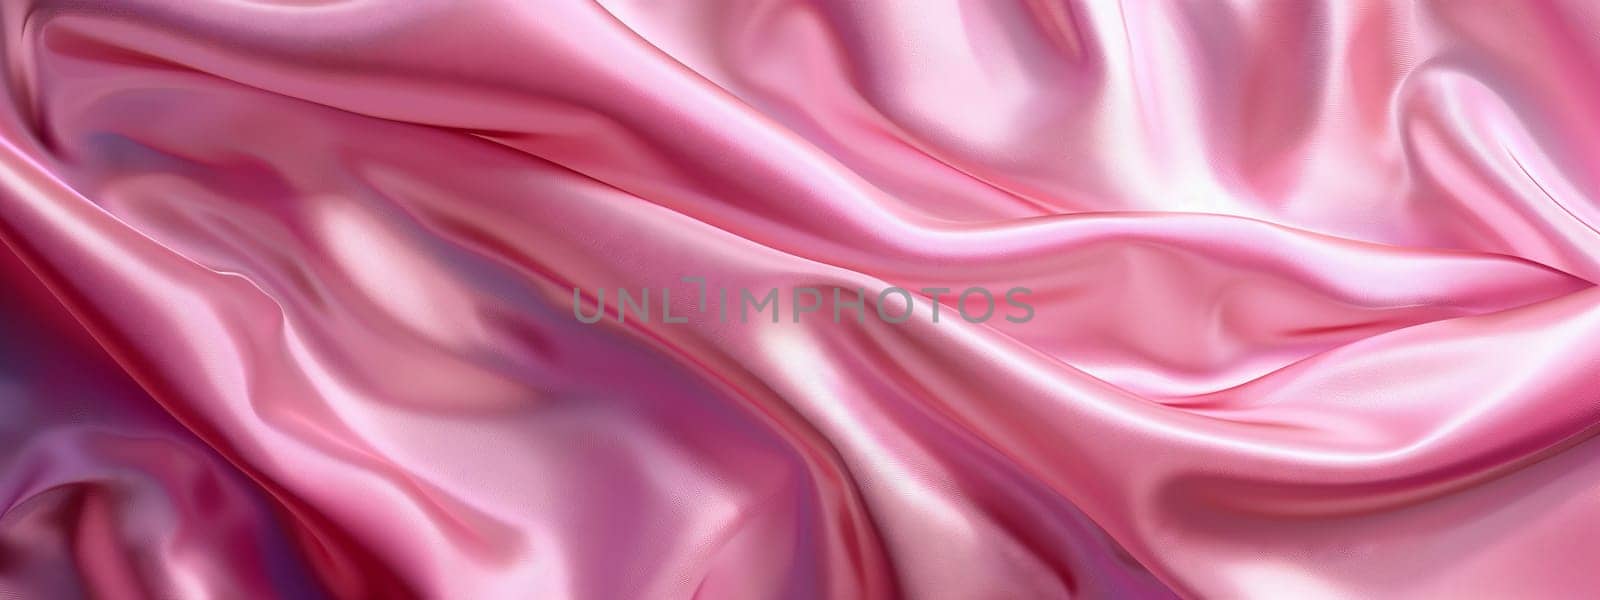 Closeup of vibrant pink satin fabric with intricate floral pattern by richwolf